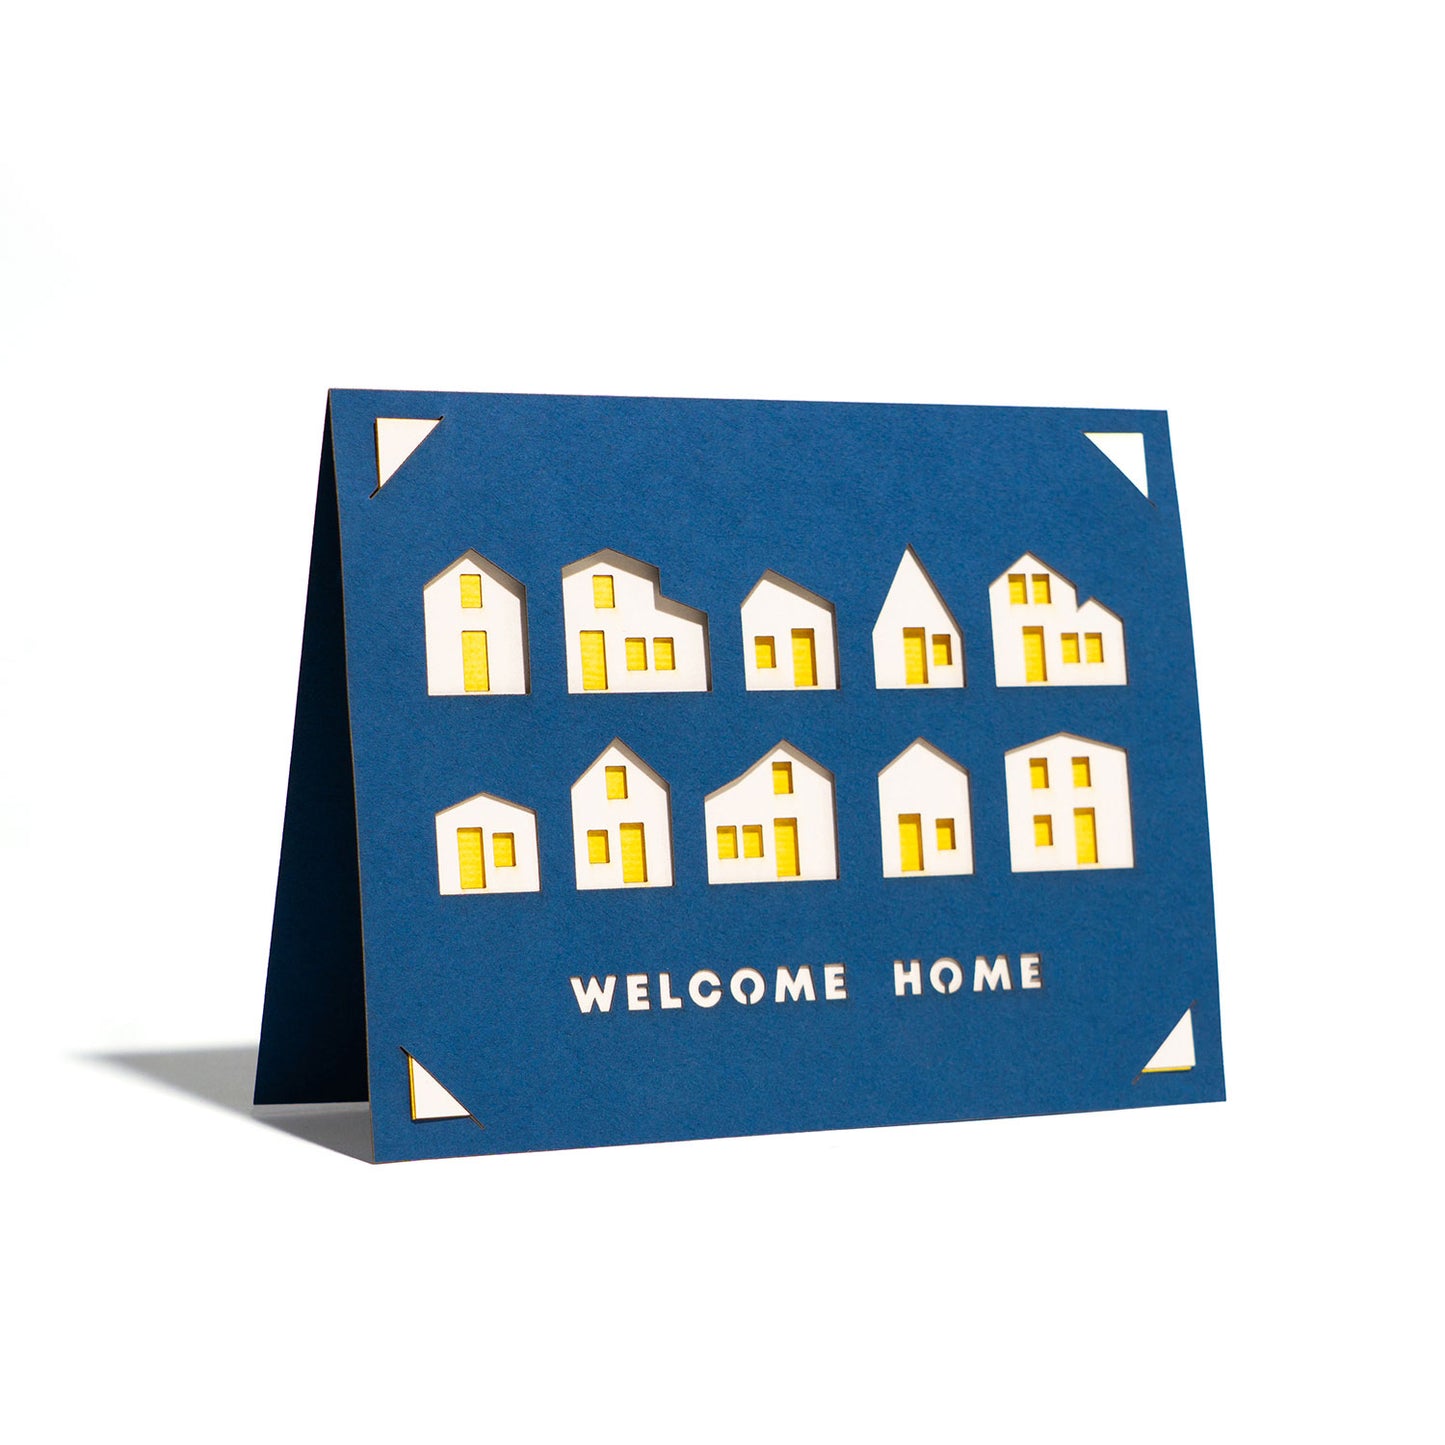 New Home Greeting Card